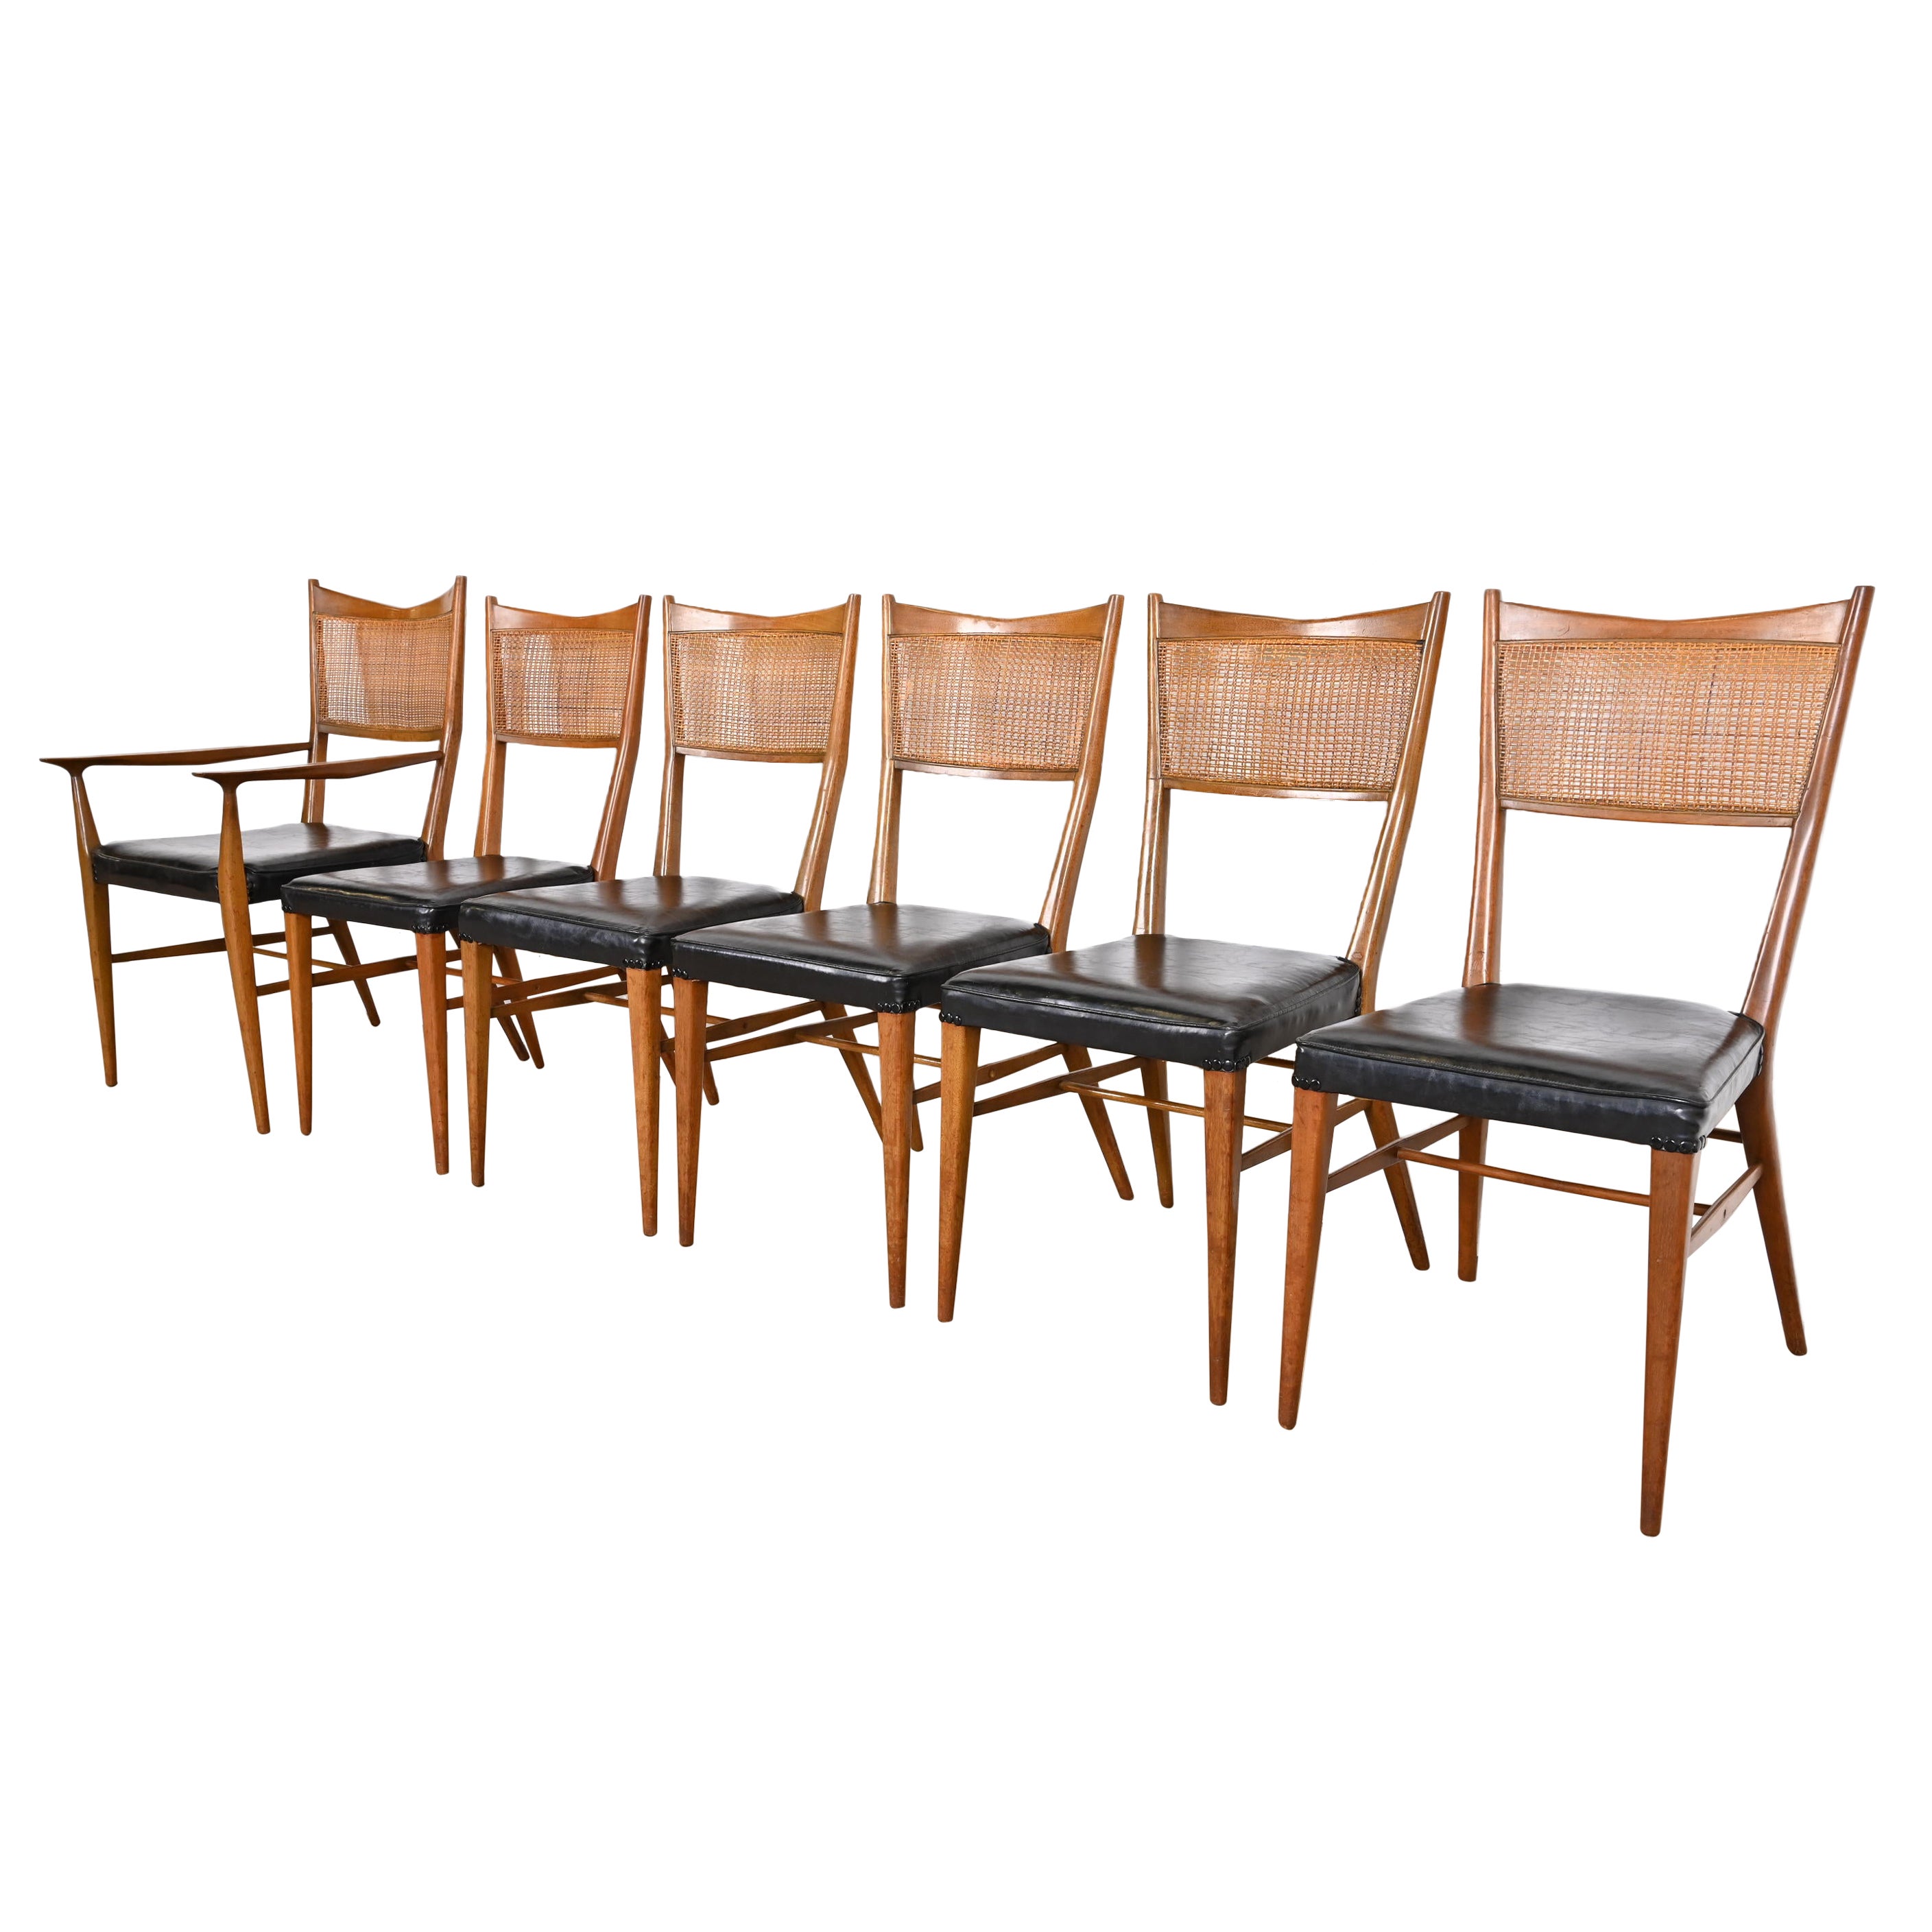 Paul McCobb Irwin Collection Sculpted Mahogany and Cane Dining Chairs, Set of 6